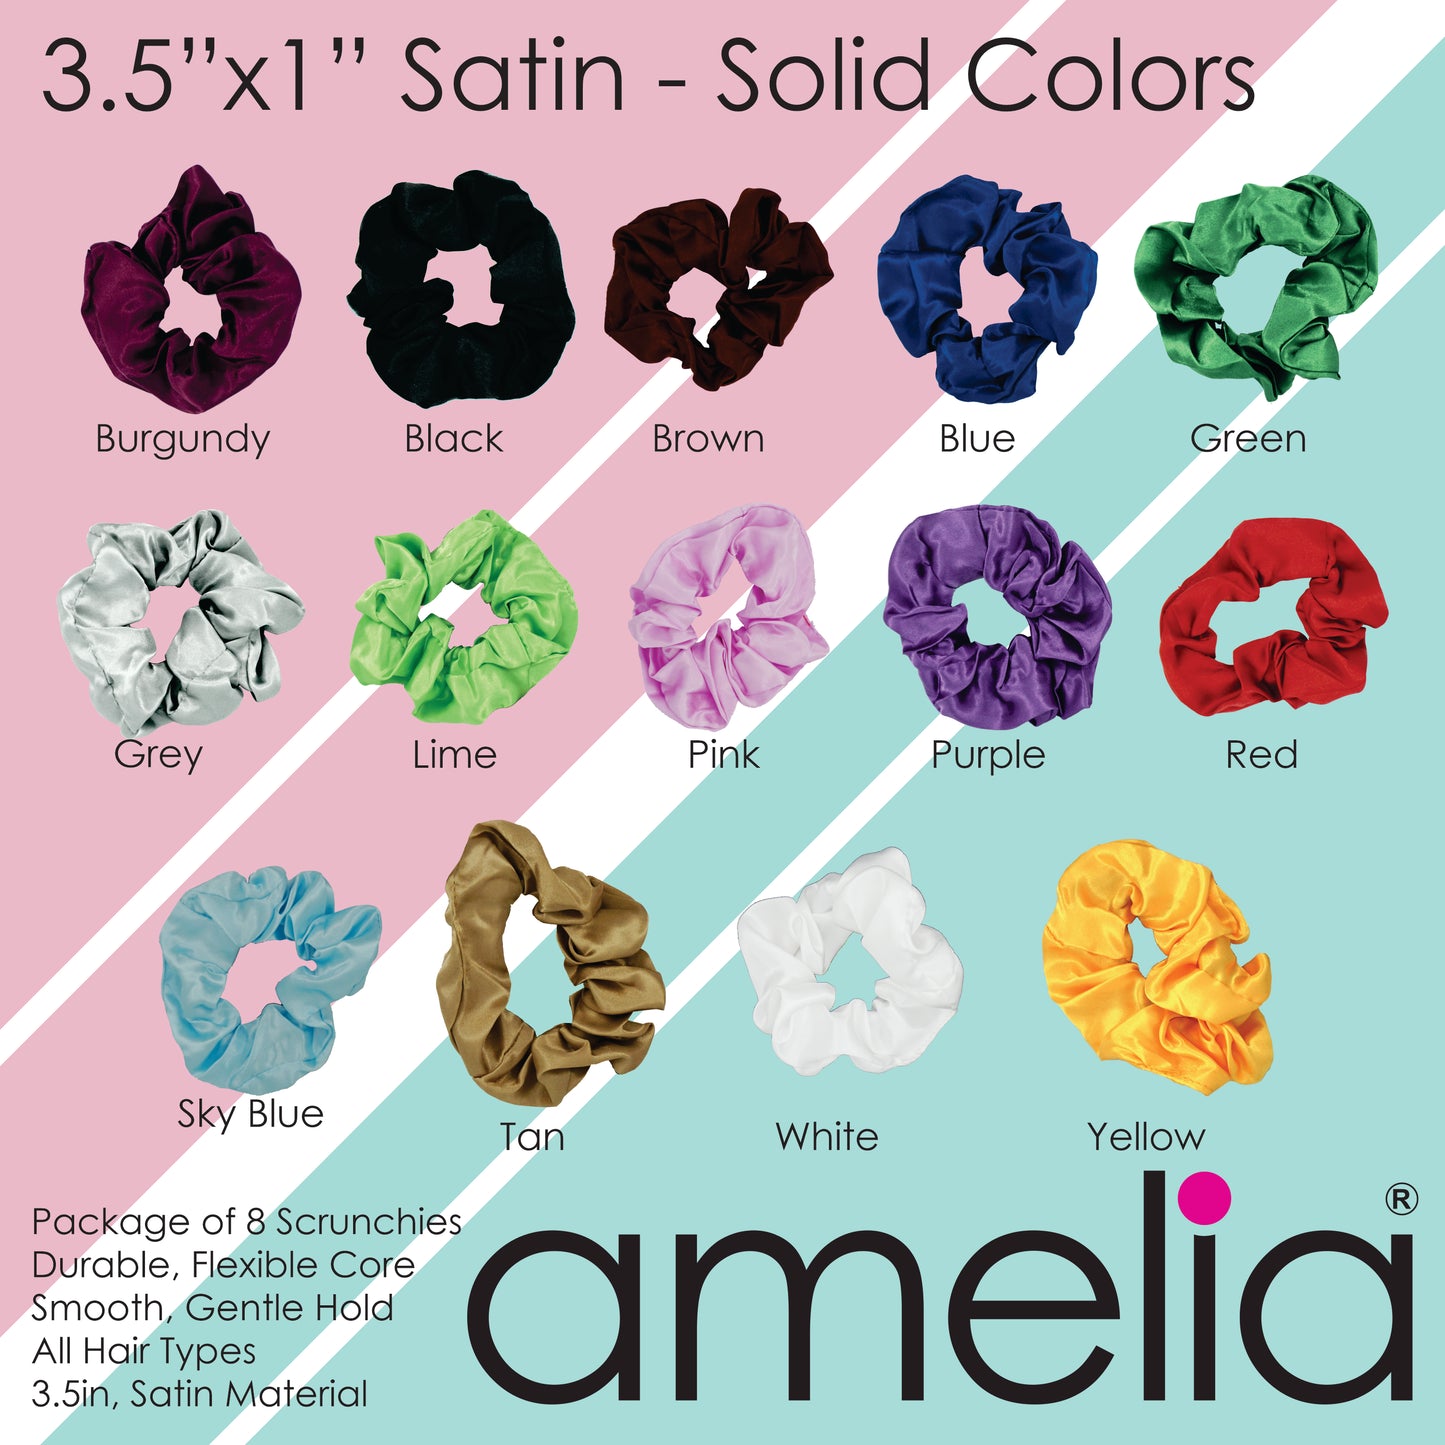 Amelia Beauty Products, Tan Satin Scrunchies, 3.5in Diameter, Gentle on Hair, Strong Hold, No Snag, No Dents or Creases. 8 Pack